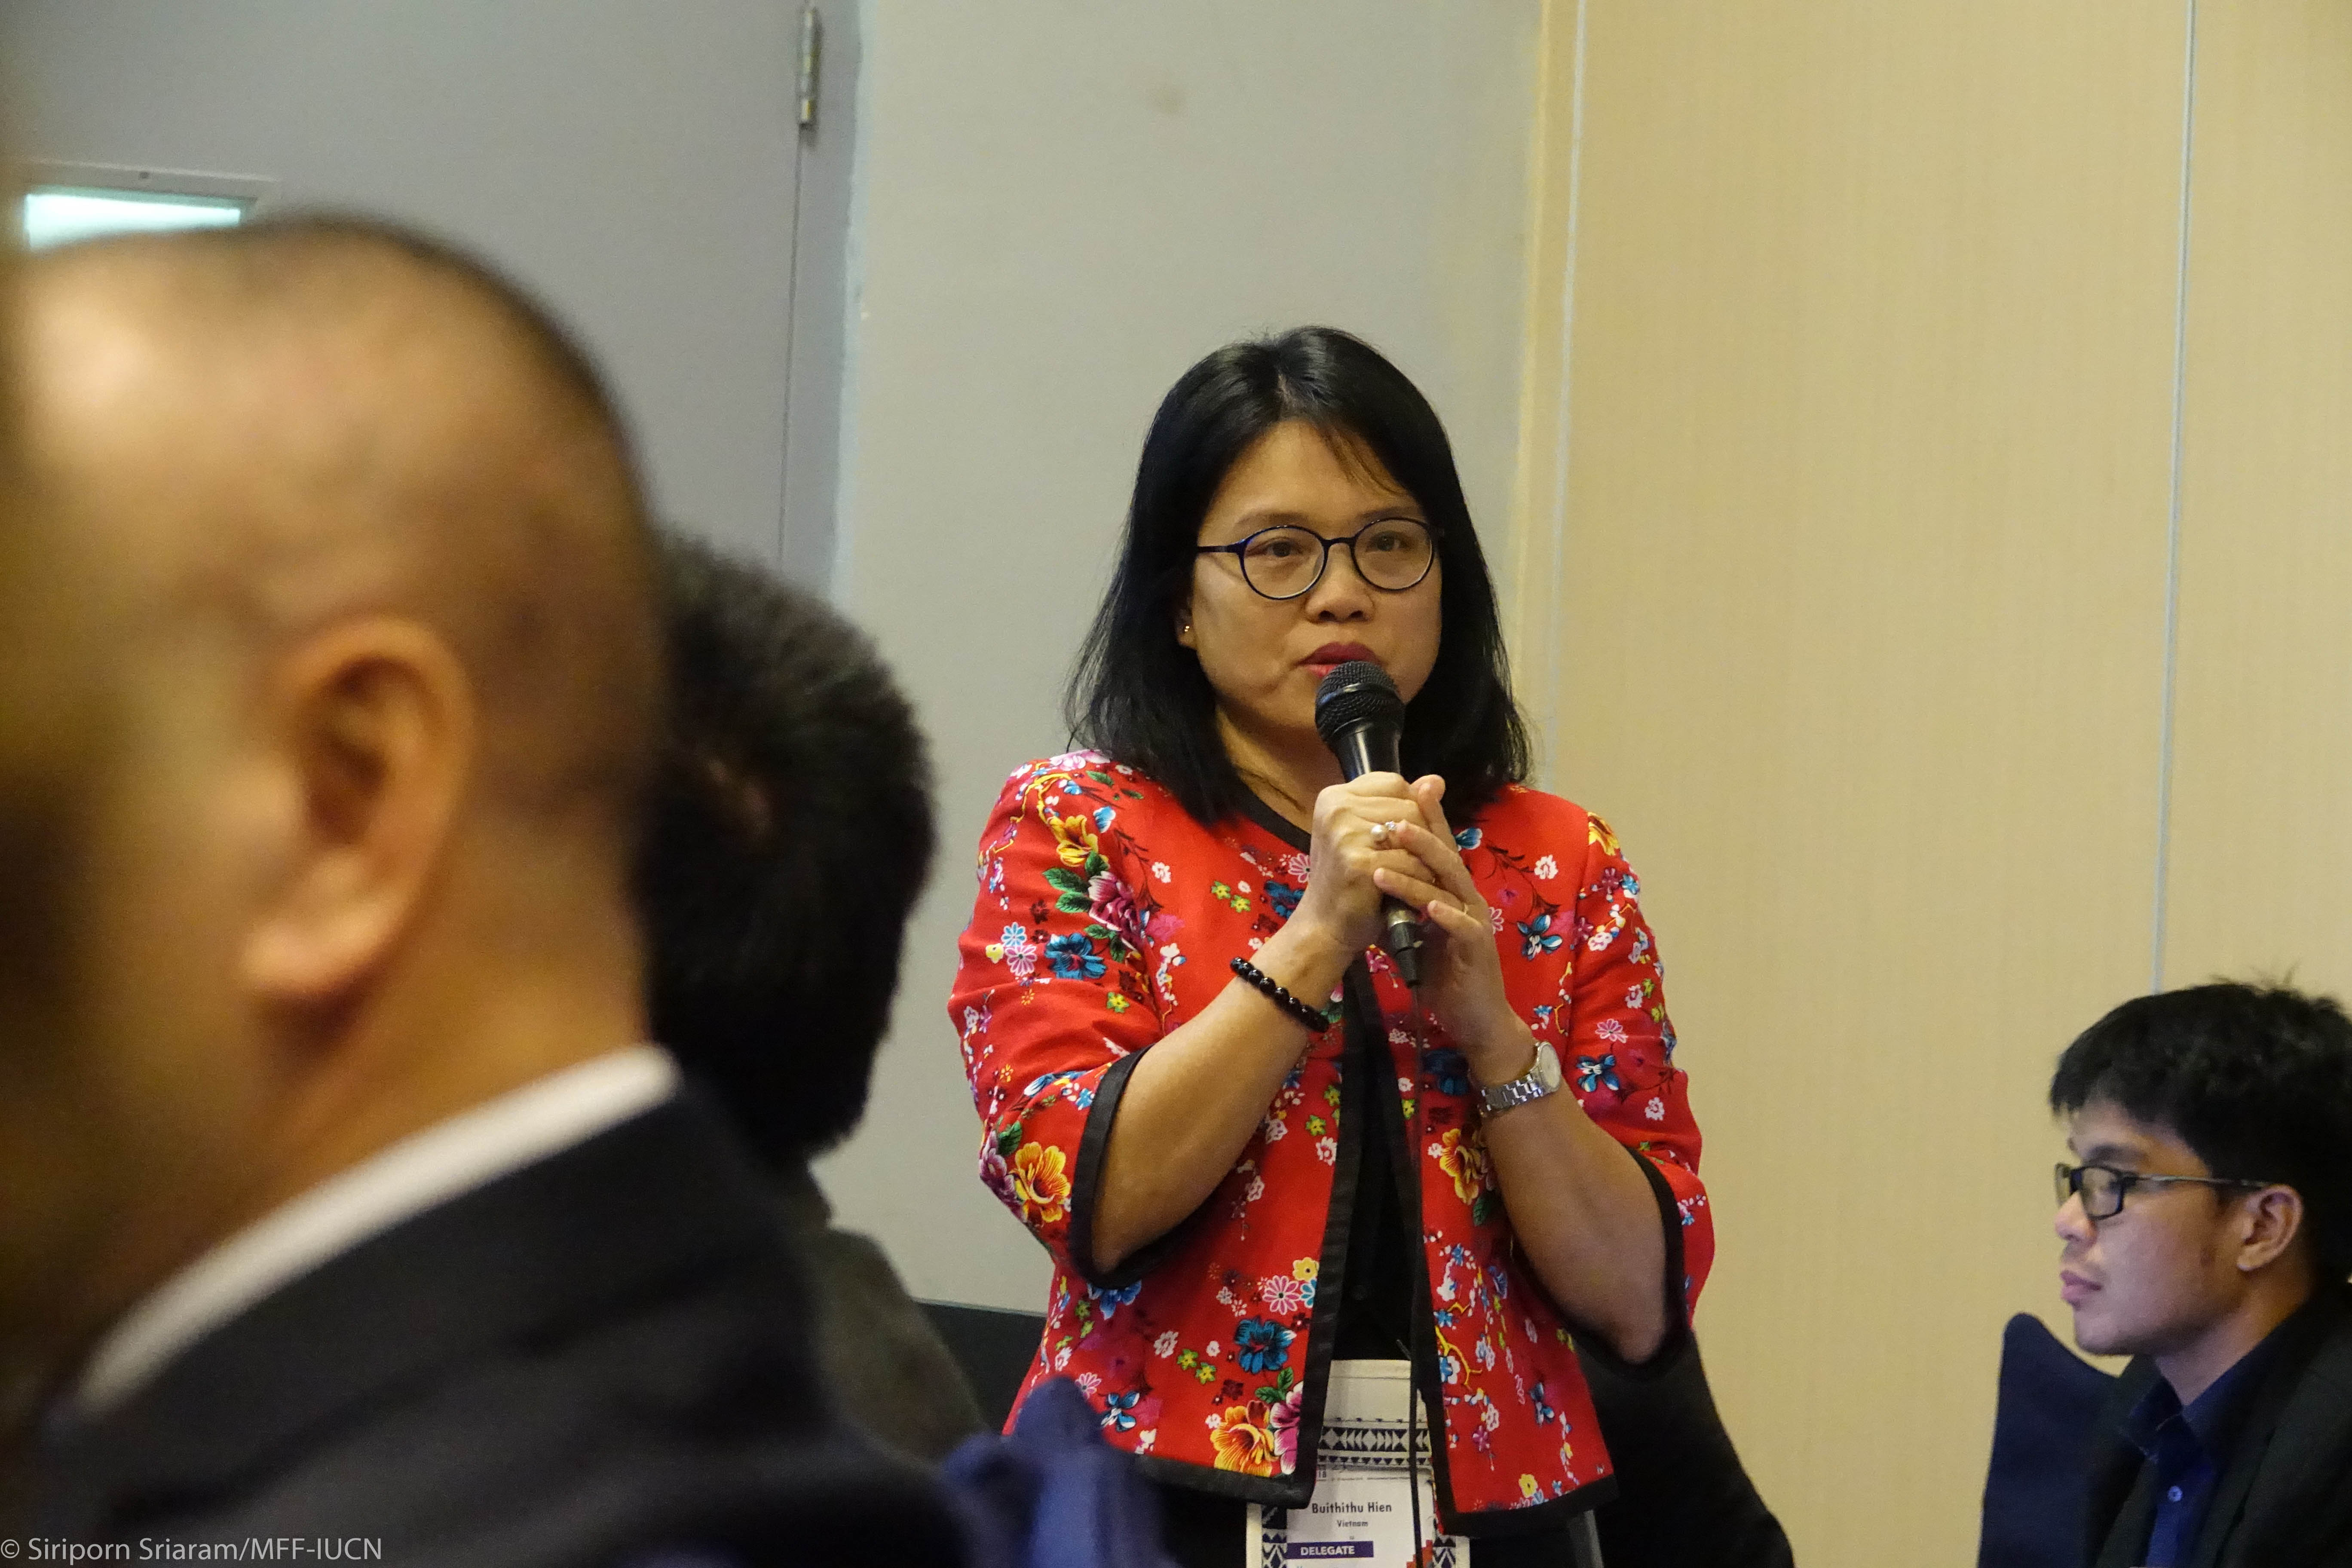 IUCN Buithithu Hien, Marine and Coastal Resources Programme Coordinator, provides an overview of the challenges faced by Vietnam